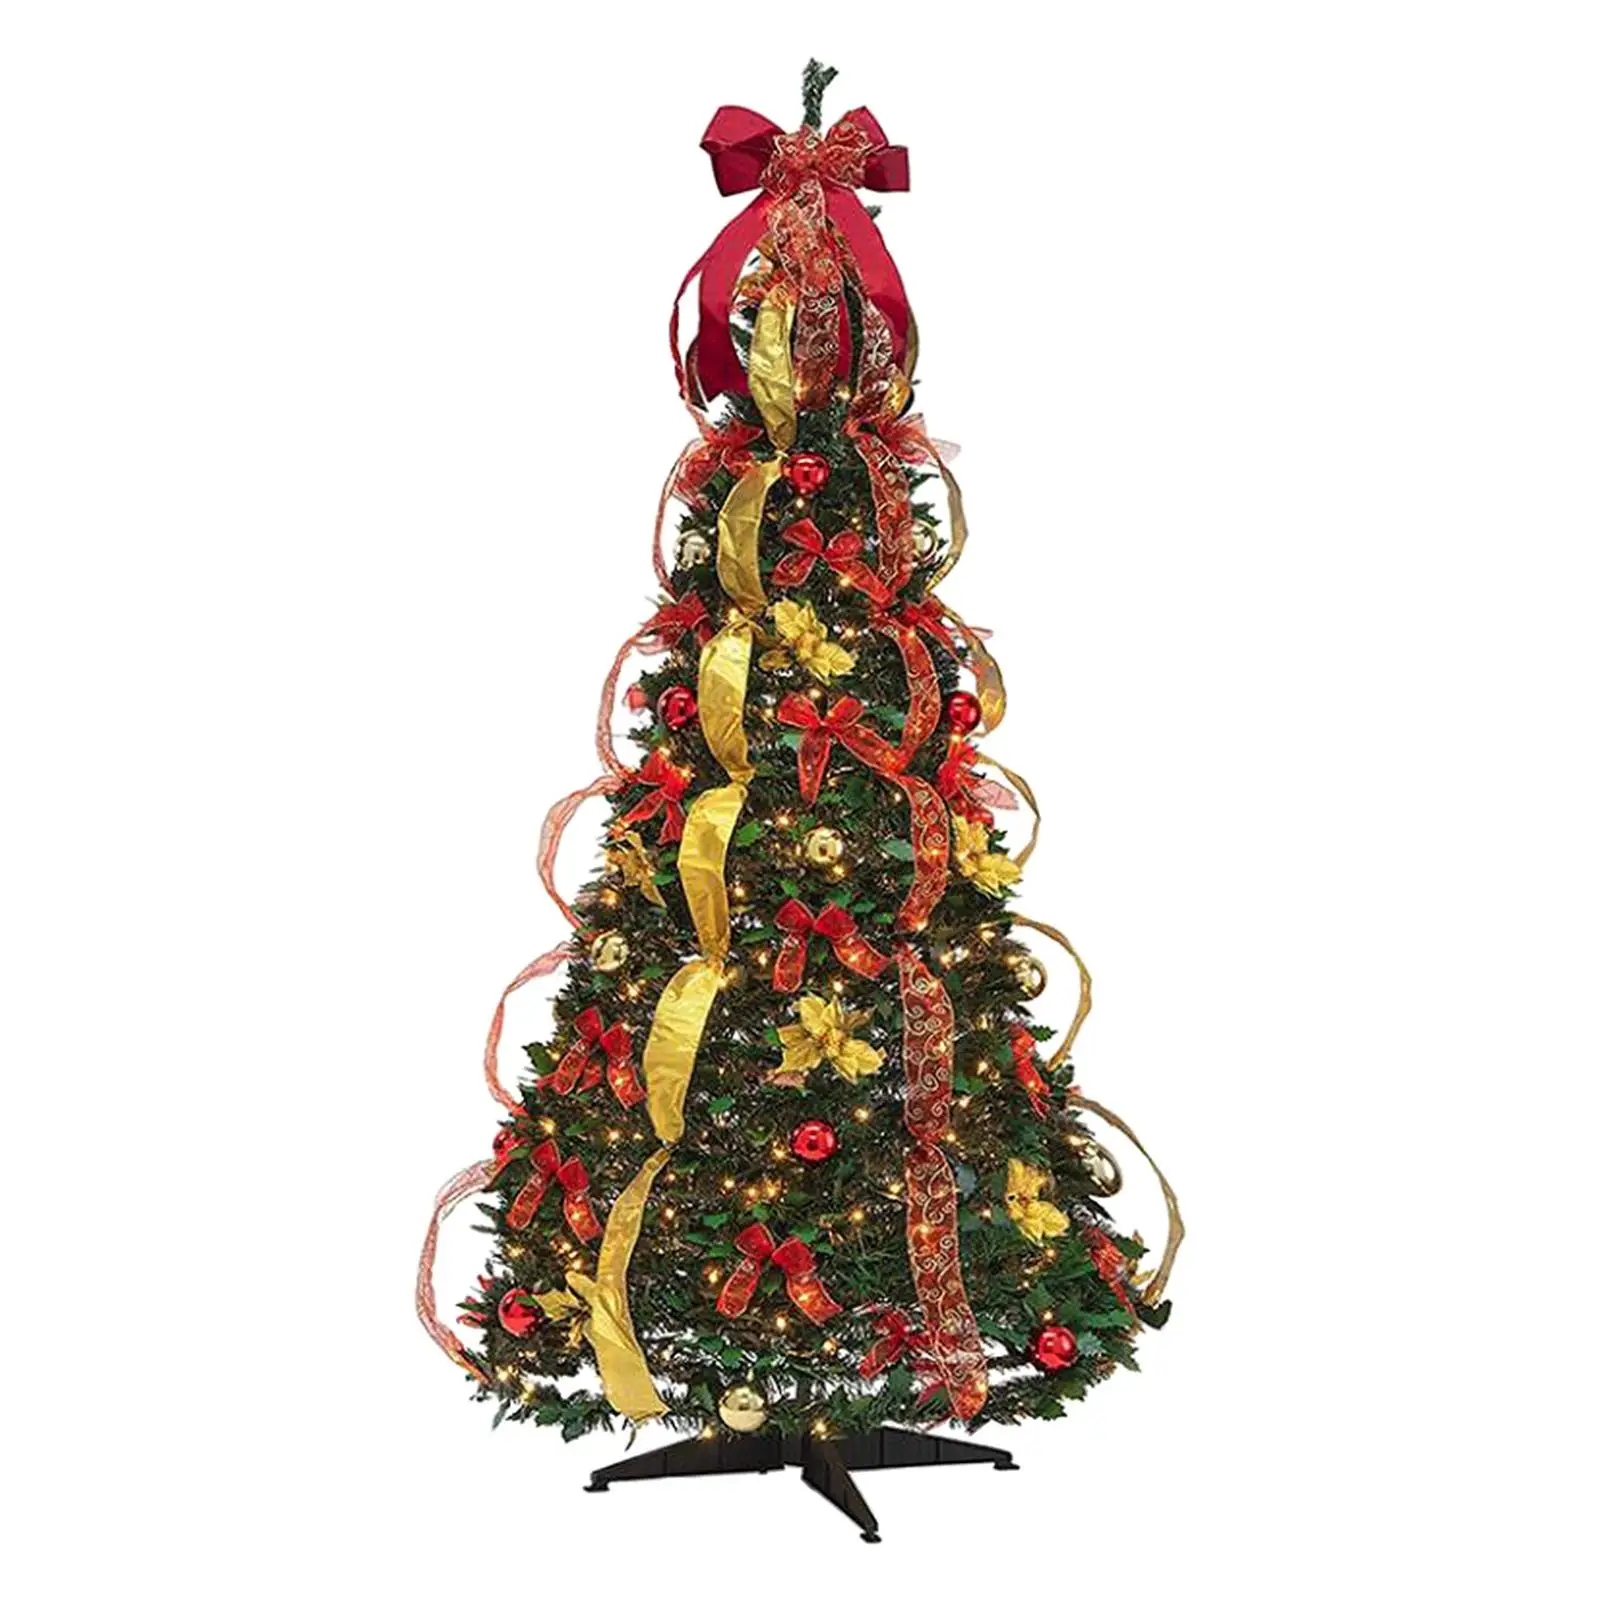 Foldable Christmas Tree 6 ft Holiday Party Decor Ornaments Artificial Christmas Tree for Indoor Home Office Outdoor Decoration